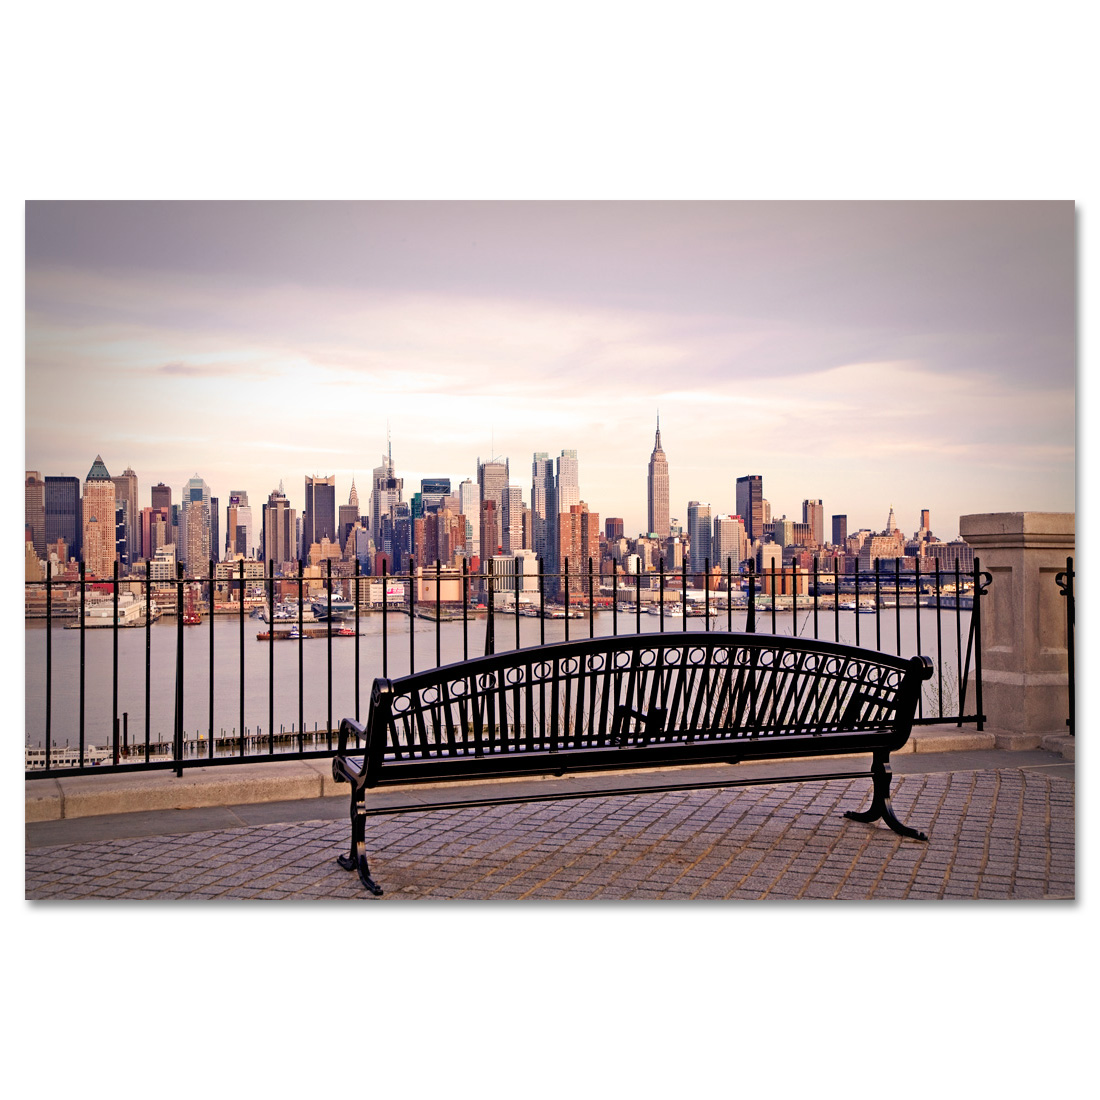 Christmas Print Bench - Gifts Midtown Manhattan from at NY York Art View New